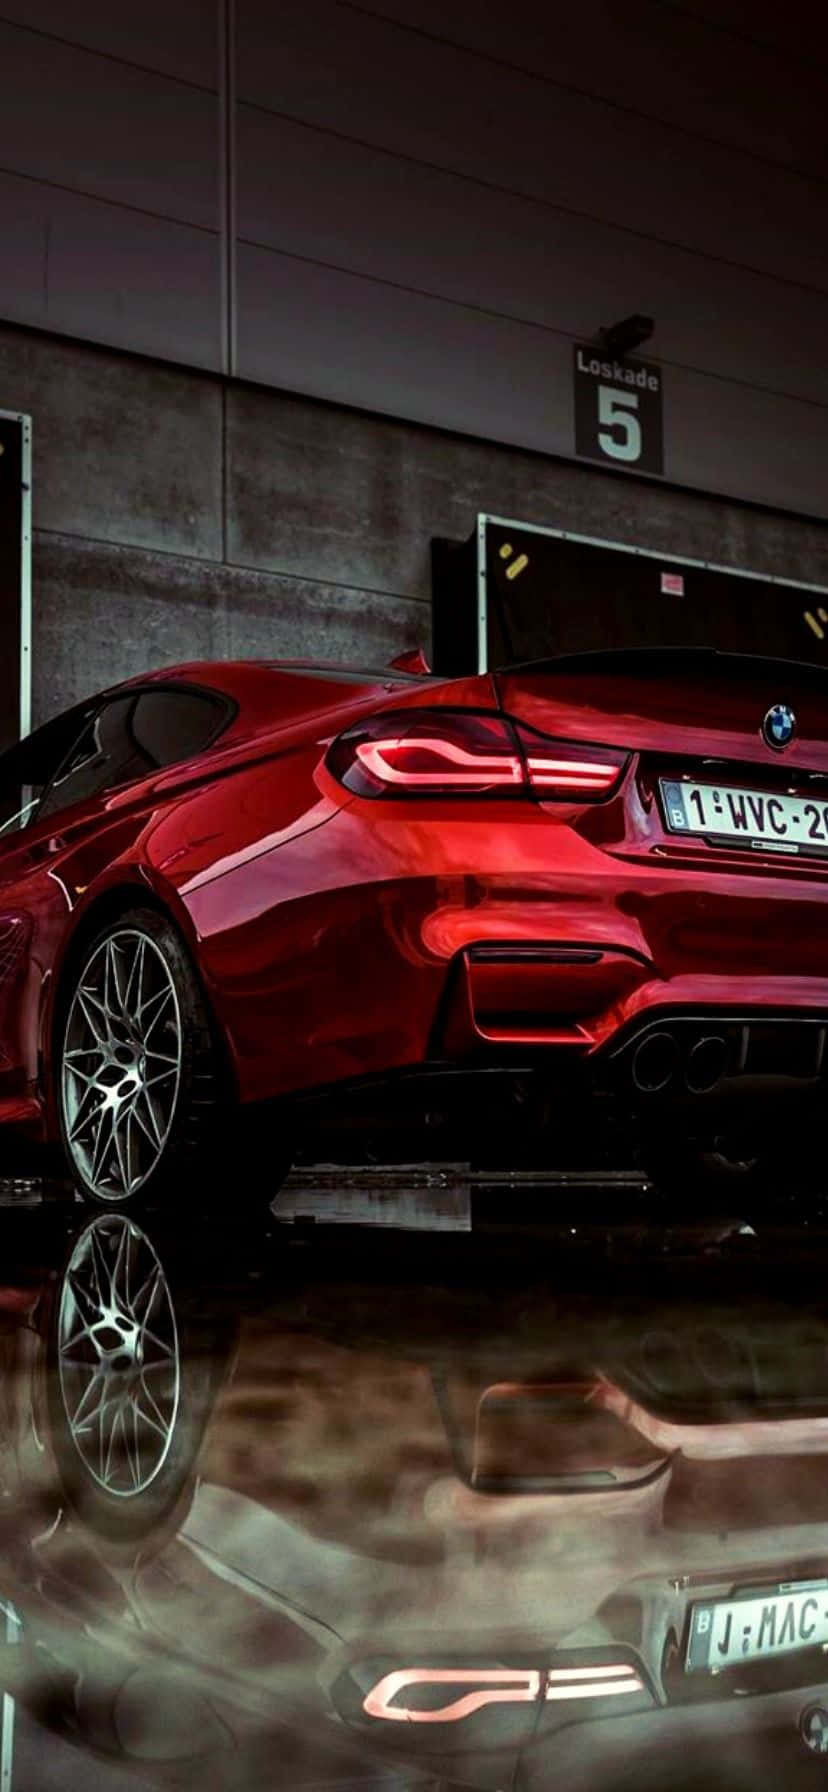 Coolred Bmw In Italian Can Be Translated As 